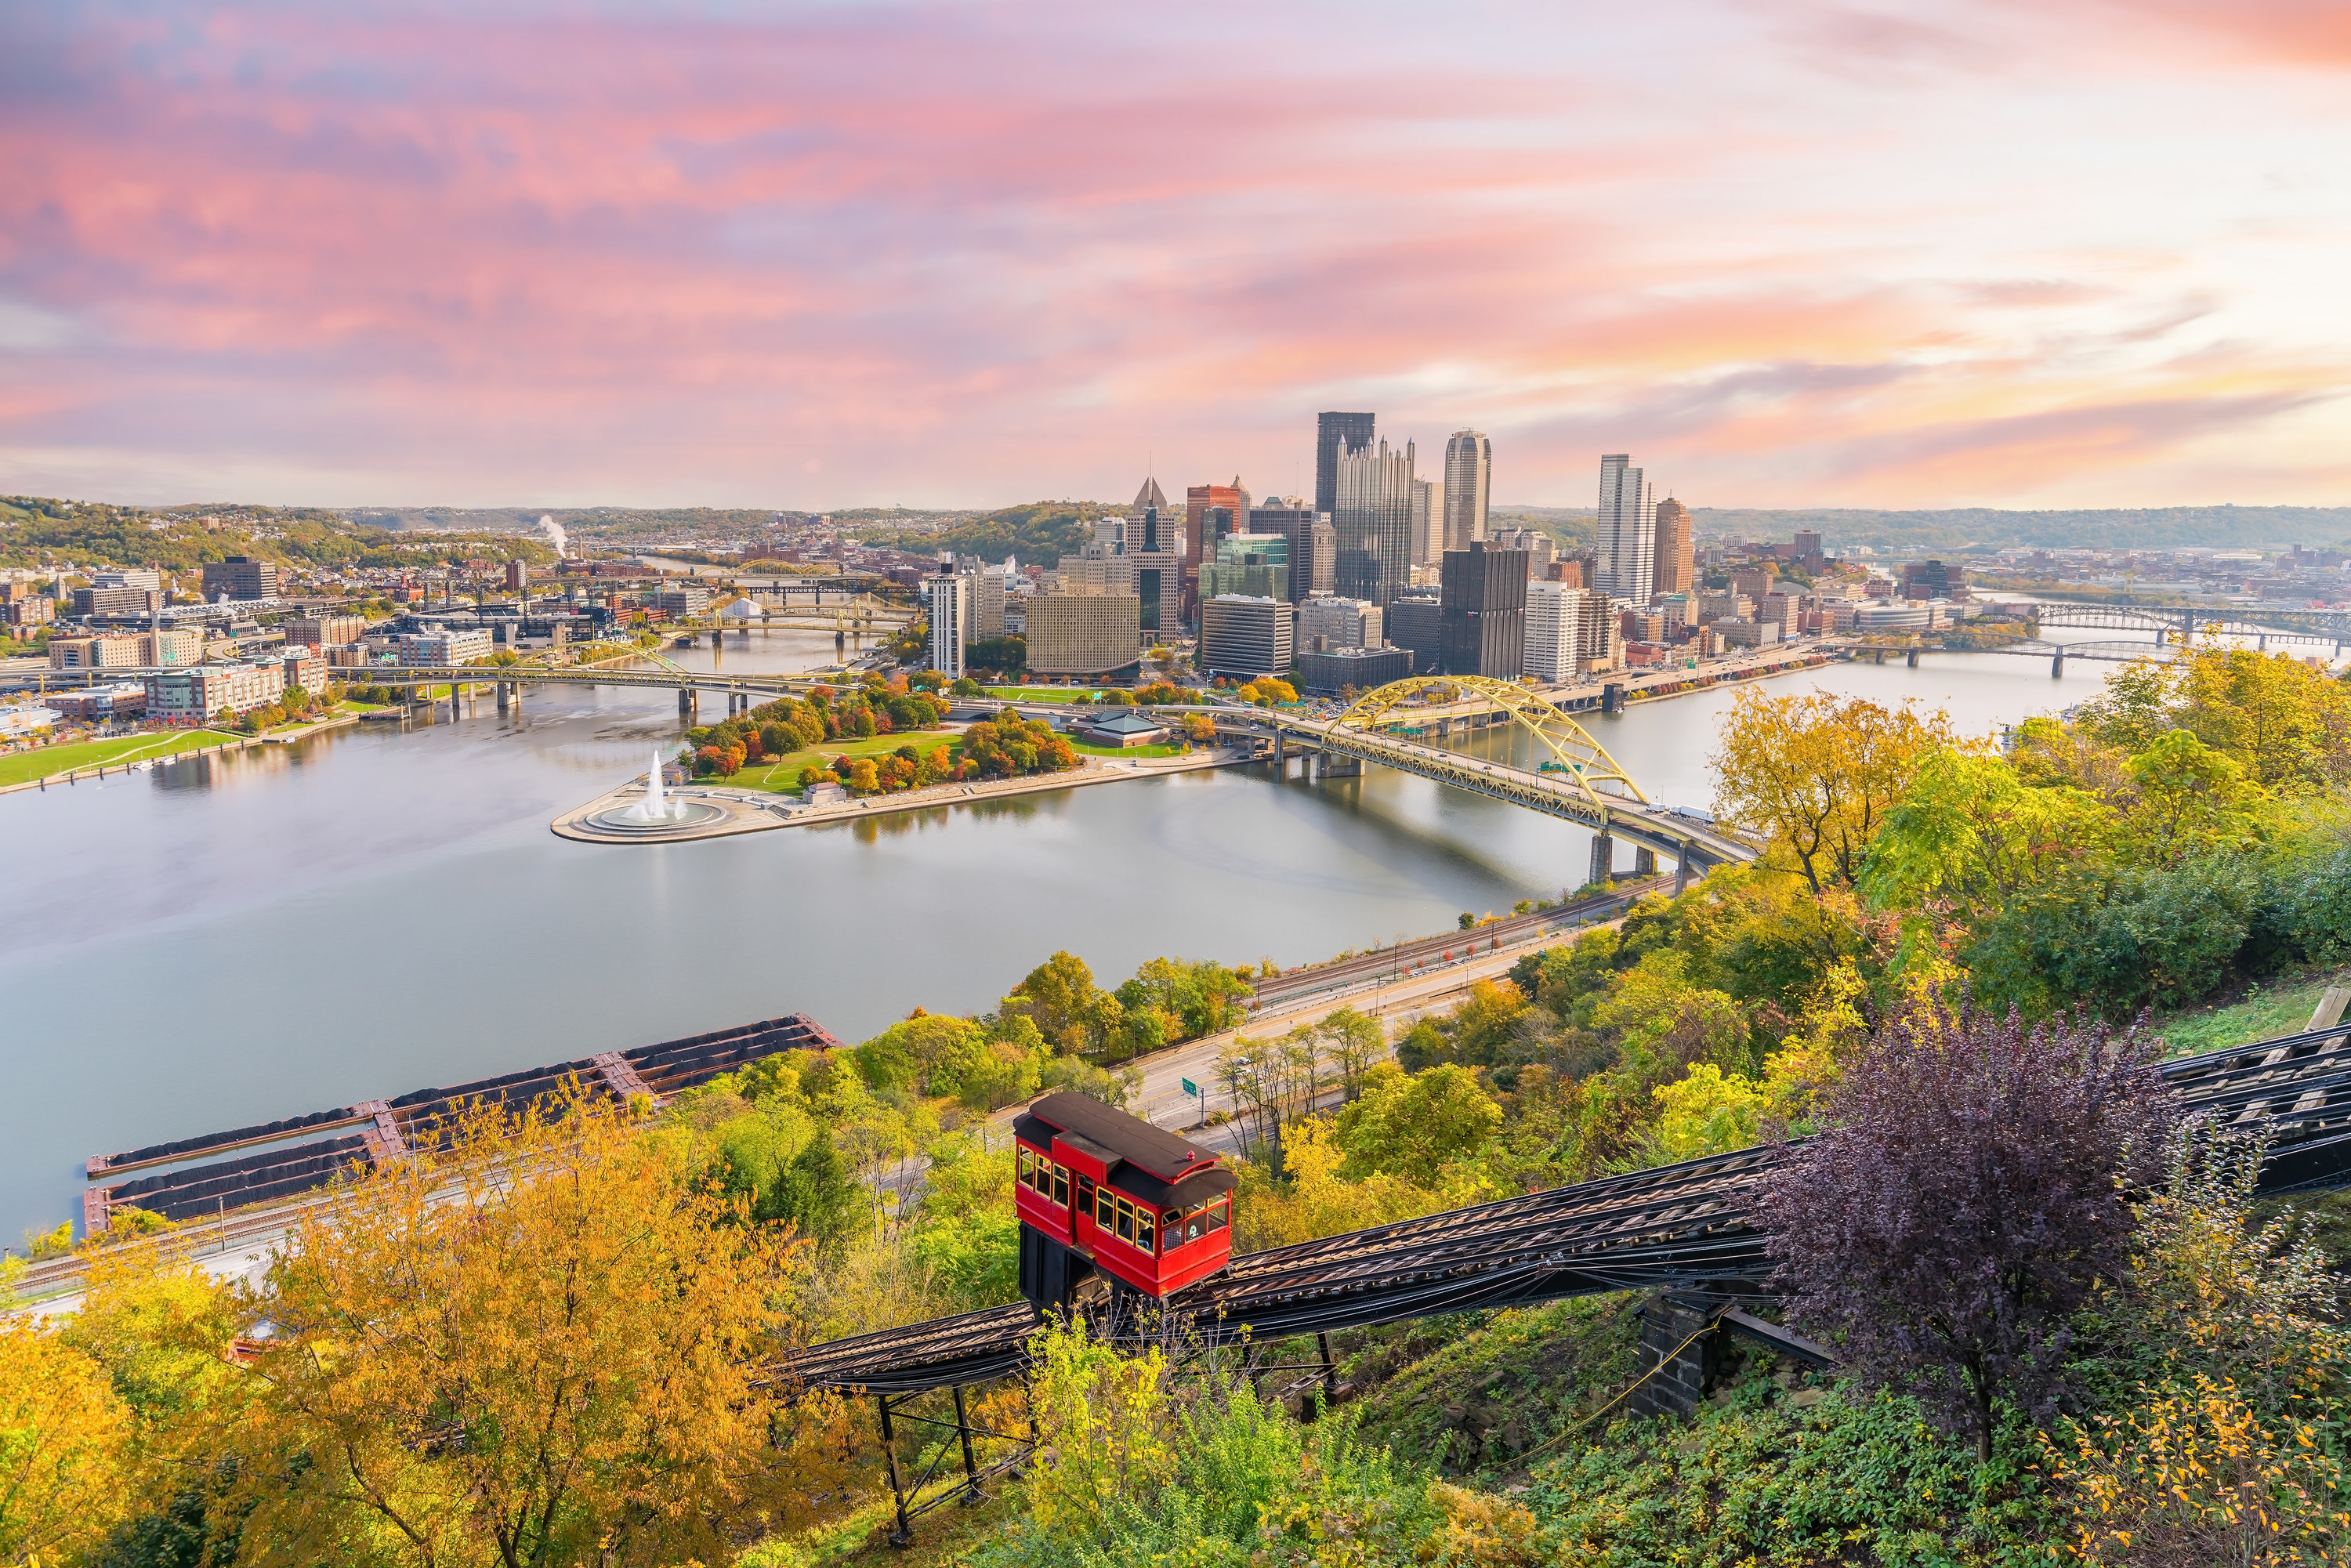 Landscape shot of Pittsburgh skyline at sunset with a red incline car climbing up the track in the foreground